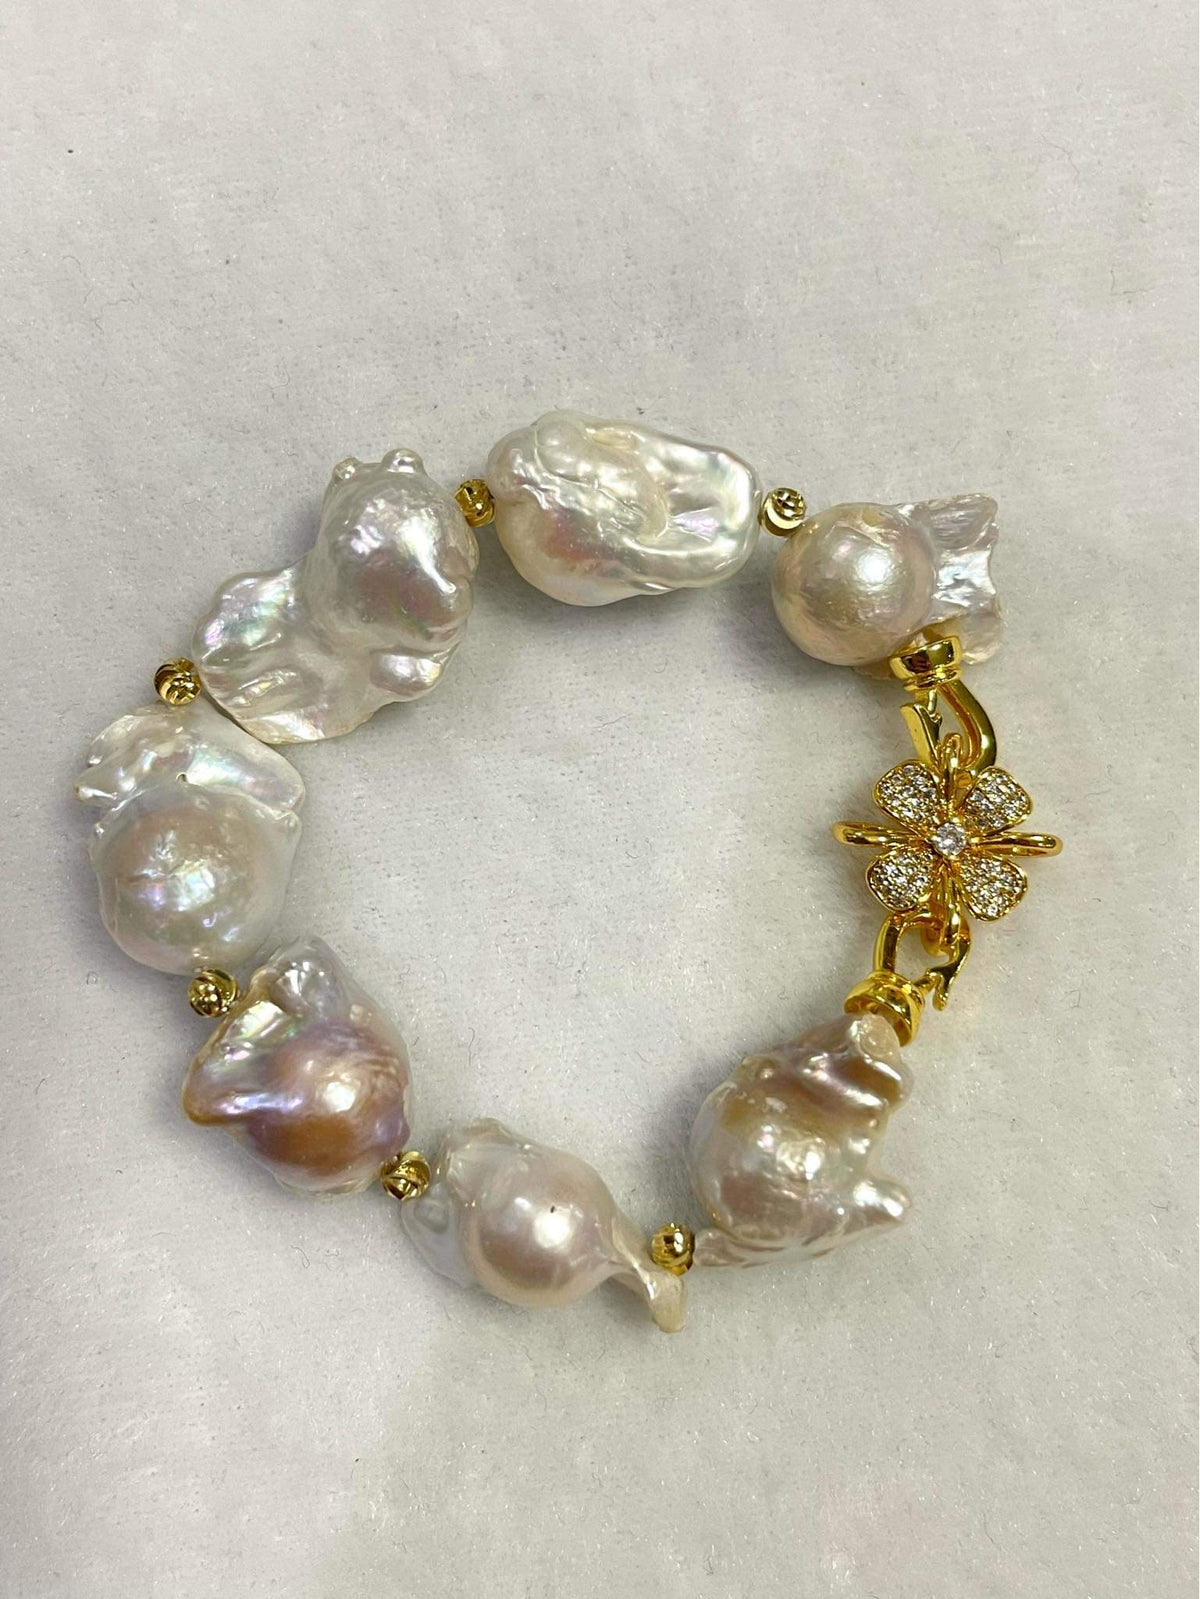 Bracelet, Mabe Pearl, with accent beads and flower clasp